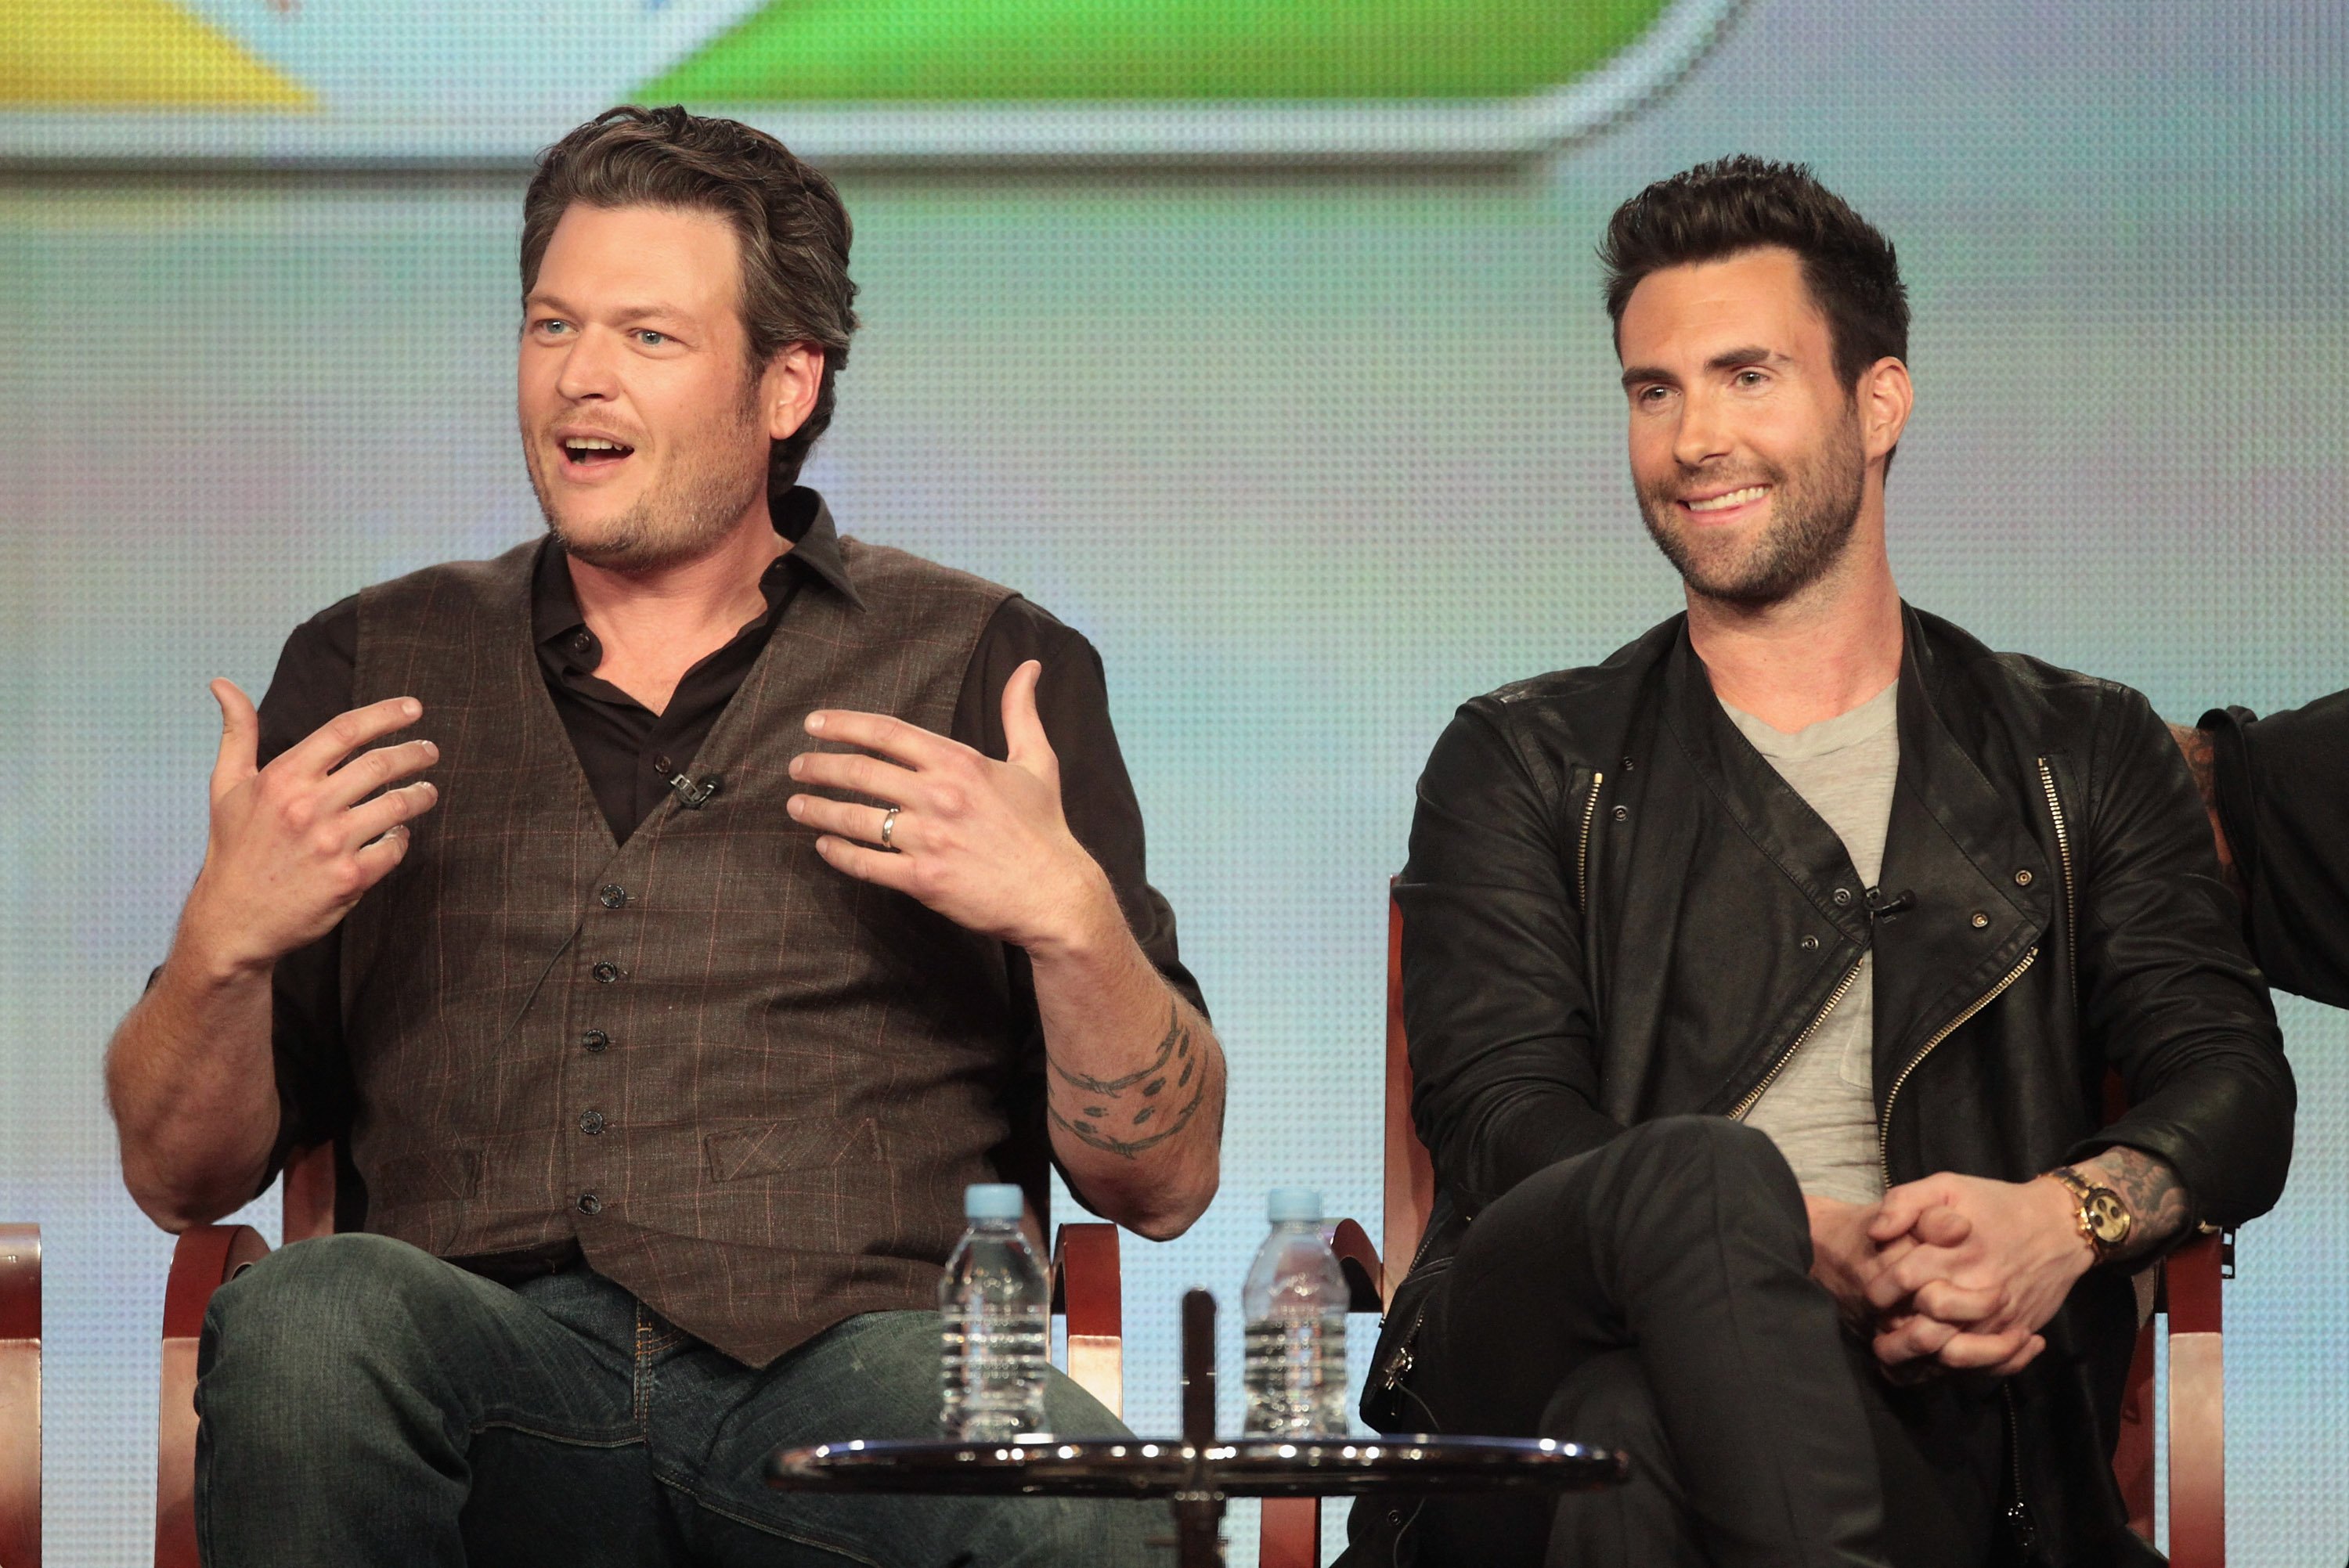 Blake Shelton and Adam Levine  during the "The Voice" panel at the 2012 Winter TCA Tour, January 6, 2012 | Photo: GettyImages